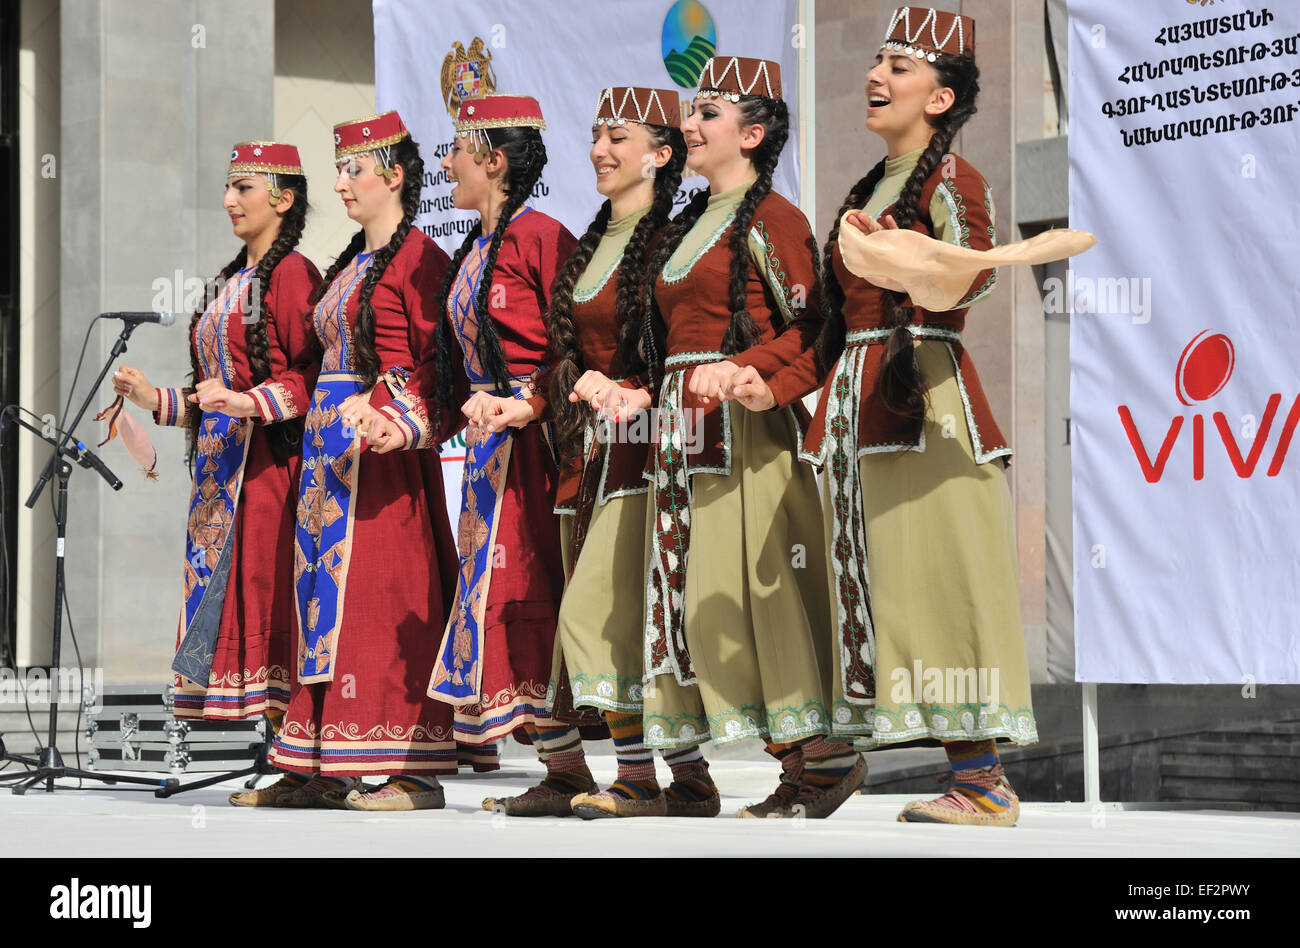 Folk dancers performing on stage during the City Day festival, Yerevan, Armenia Stock Photo